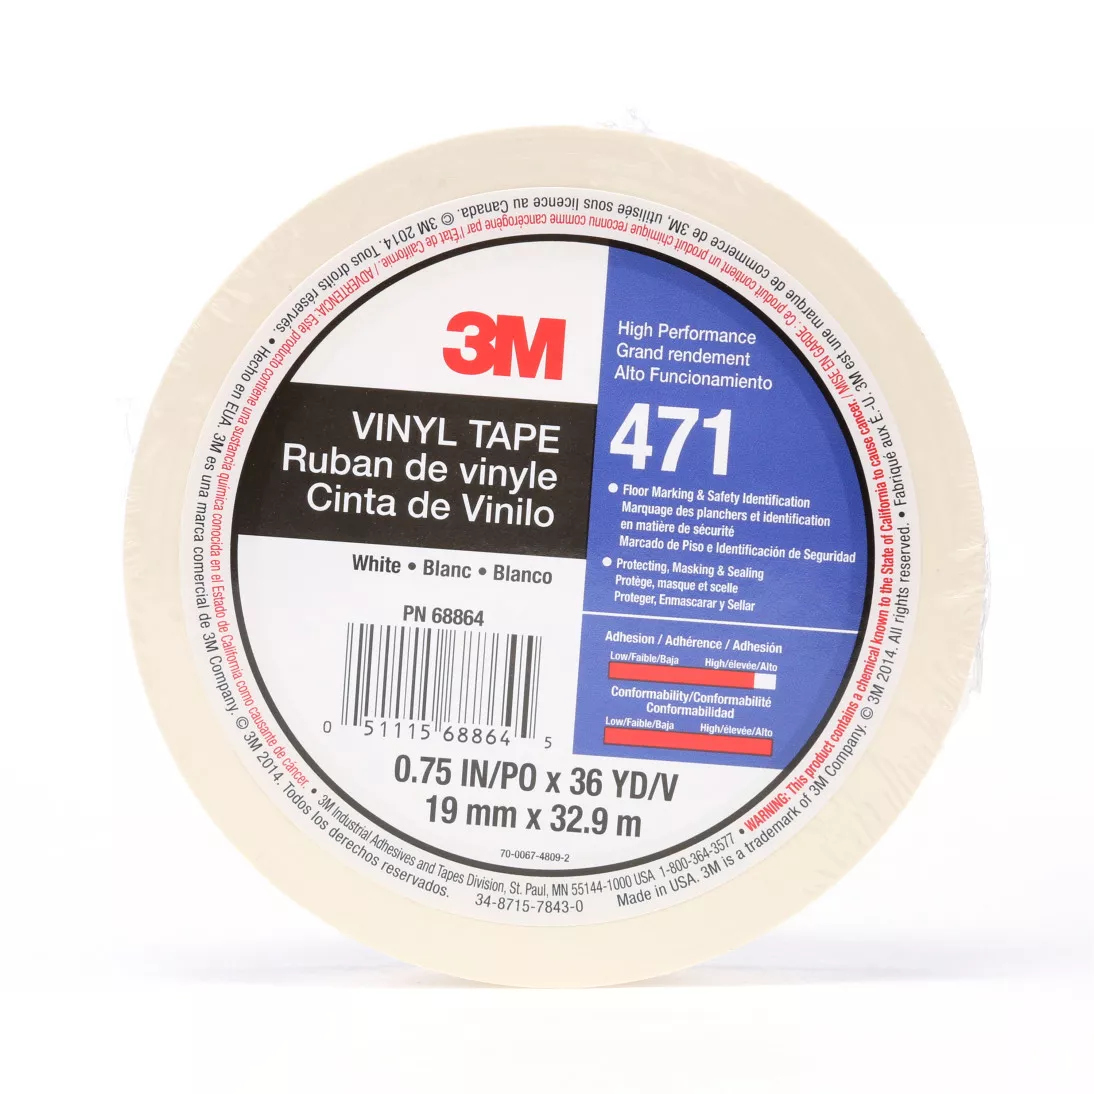 3M™ Vinyl Tape 471, White, 3/4 in x 36 yd, 5.2 mil, 48 rolls per case,
Individually Wrapped Conveniently Packaged